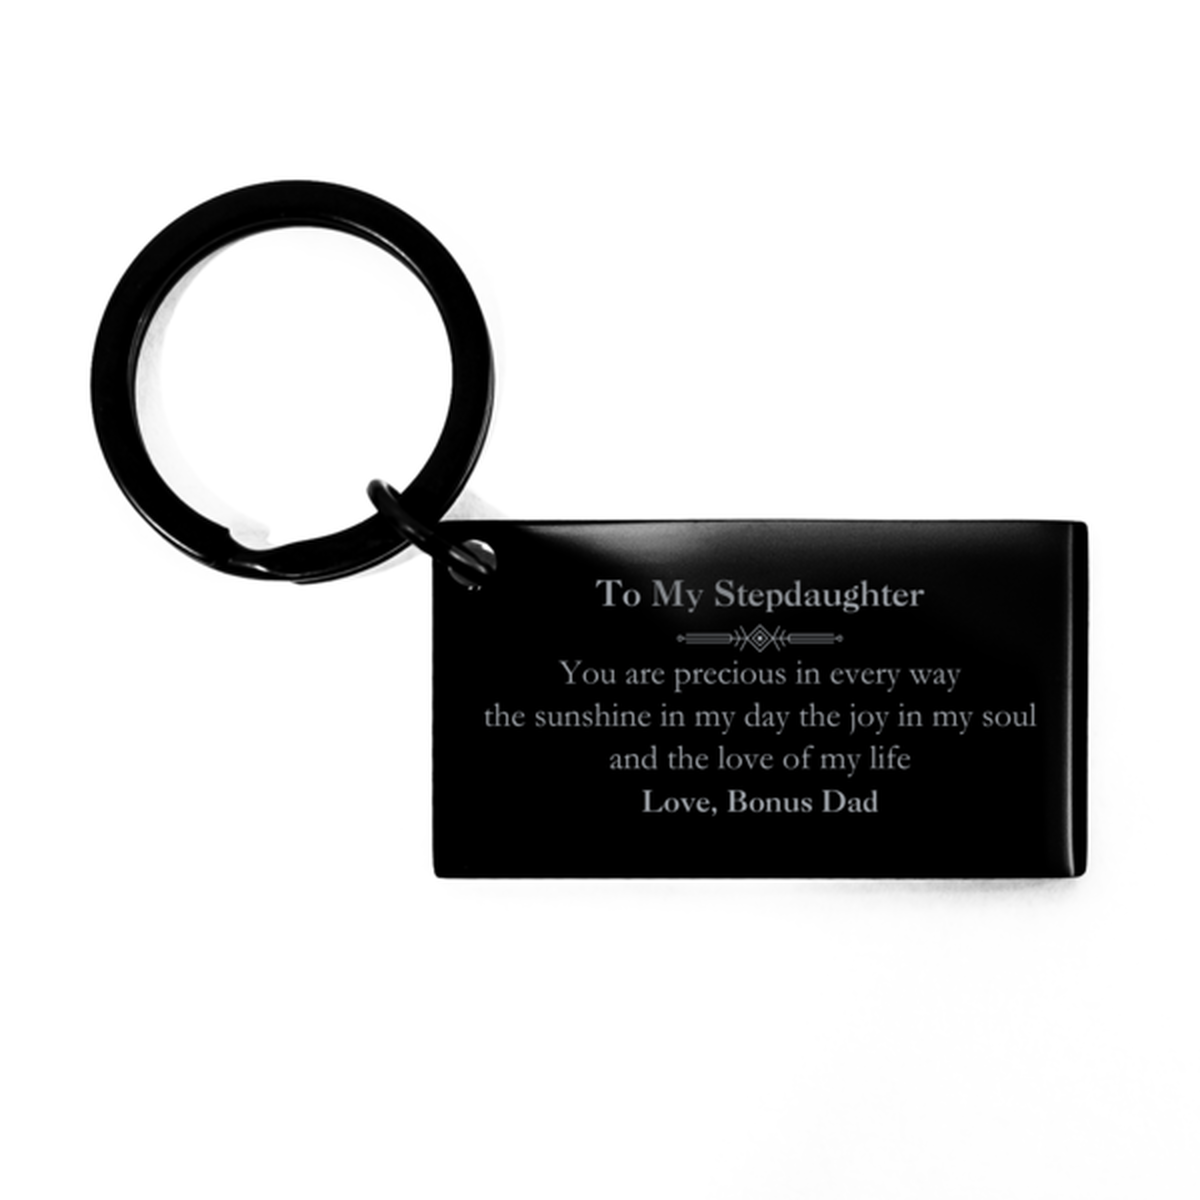 Graduation Gifts for Stepdaughter Keychain Present from Bonus Dad, Christmas Stepdaughter Birthday Gifts Stepdaughter You are precious in every way the sunshine in my day. Love, Bonus Dad